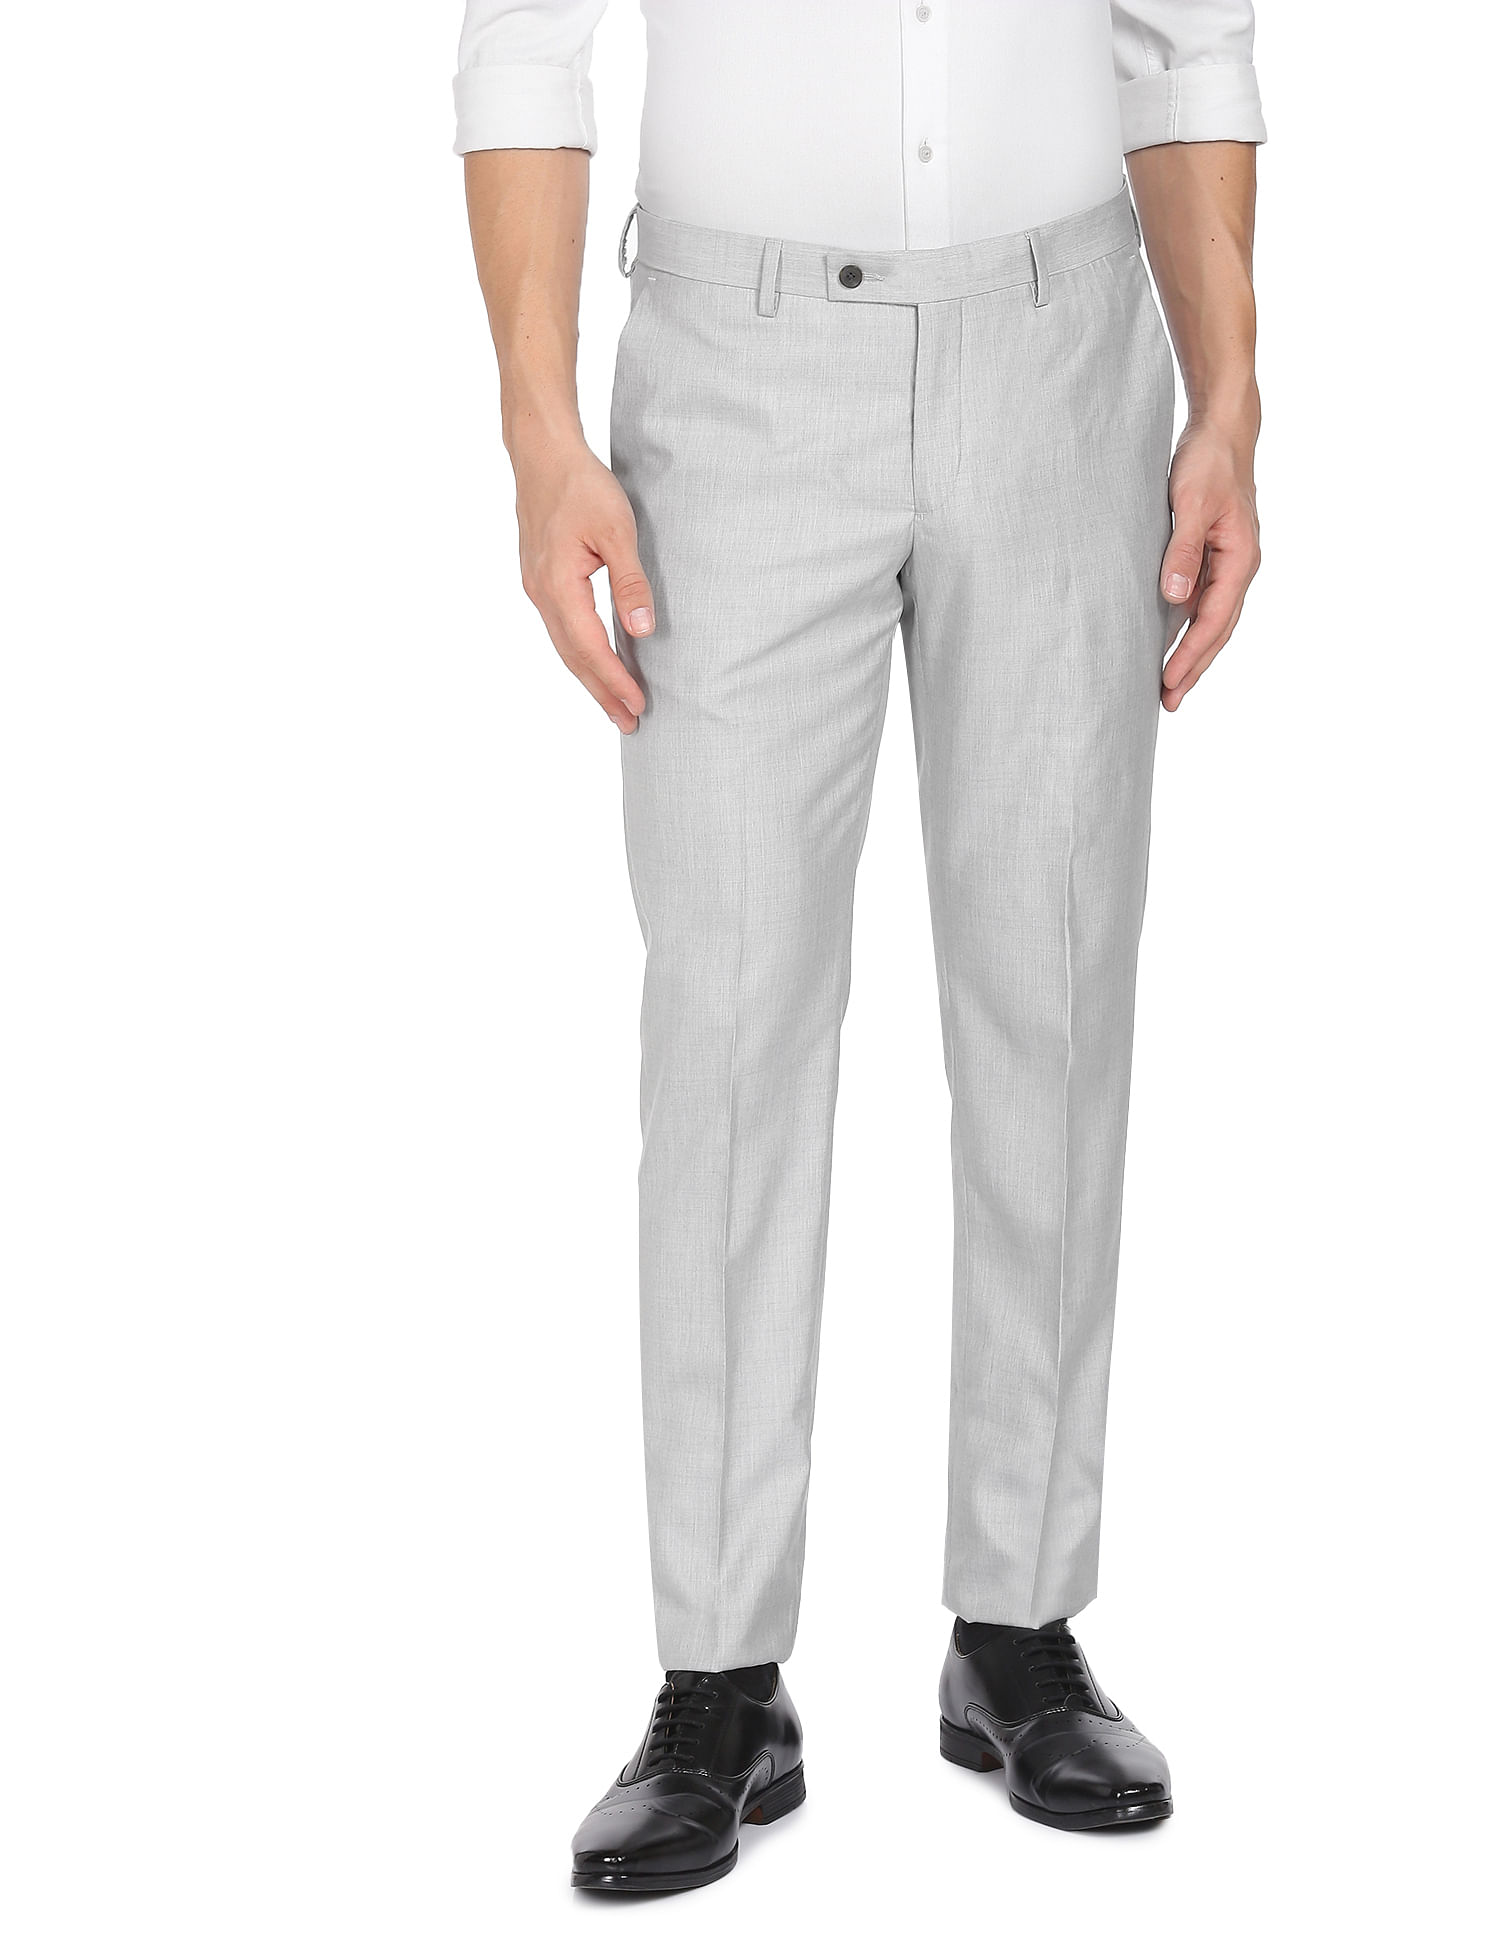 SRR Slim Fit Formal Trousers for Men Formal Pants for Office and Party Men  Formal Light Grey Trousers